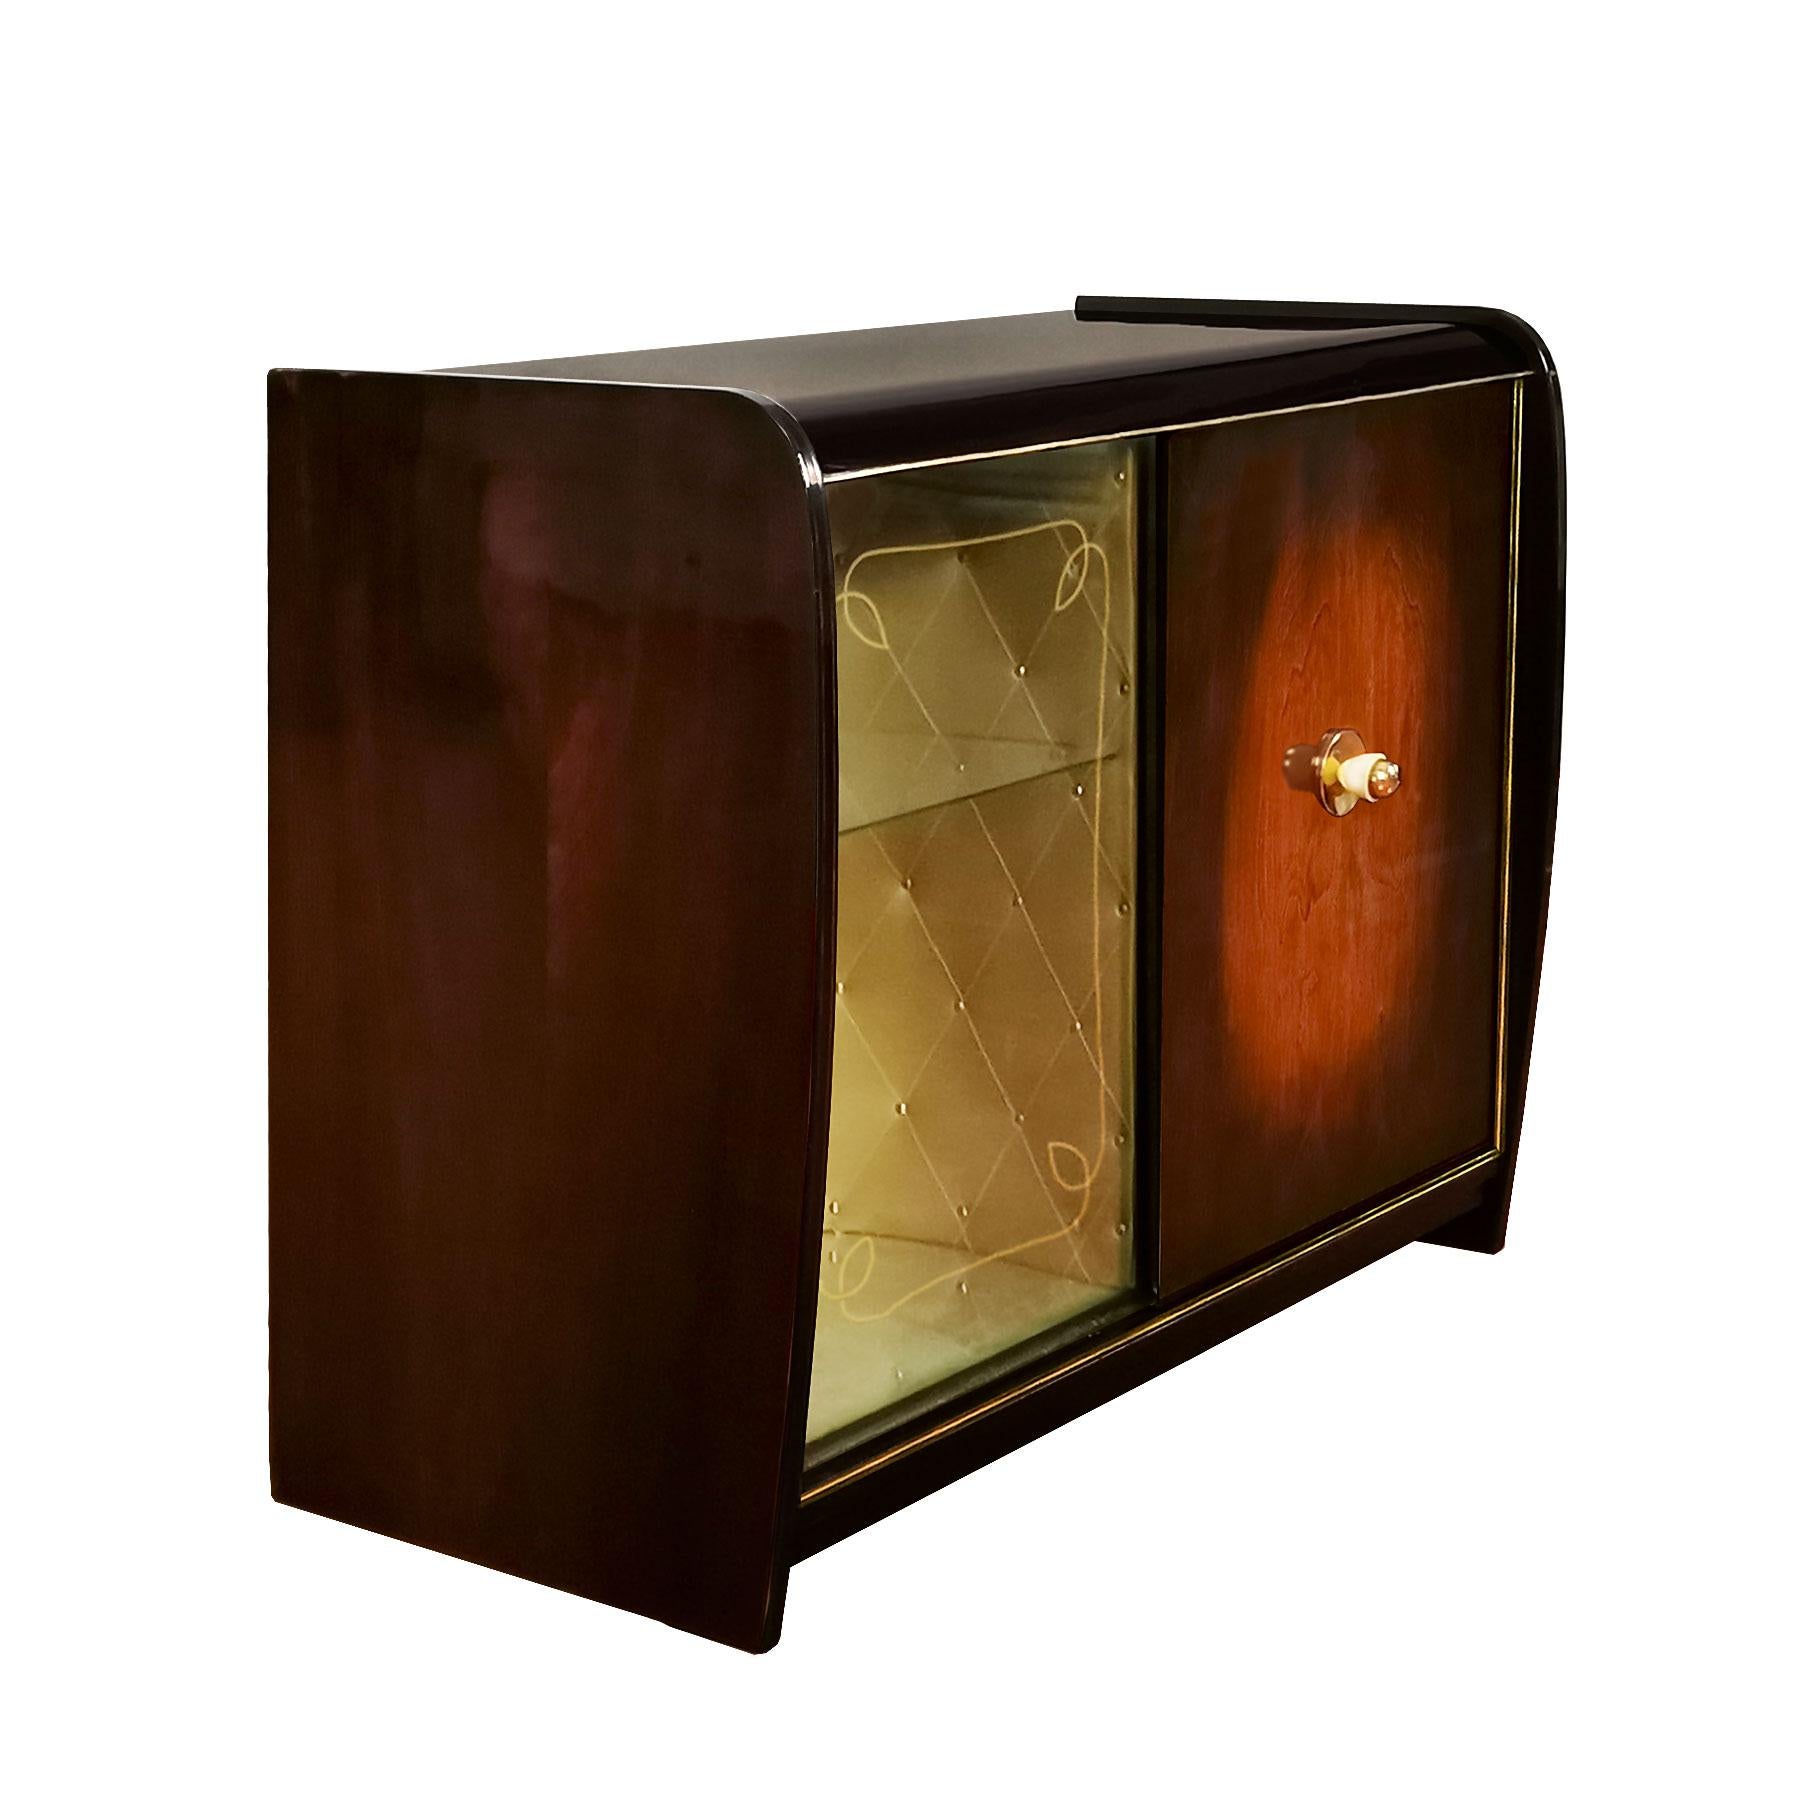 Dry bar with two sliding doors, one in glass with an acid engraved frieze and the other one in walnut with a polished brass handle, French polish. Left interior with the original padded golden green leatherette. Both interiors have a mirror on the